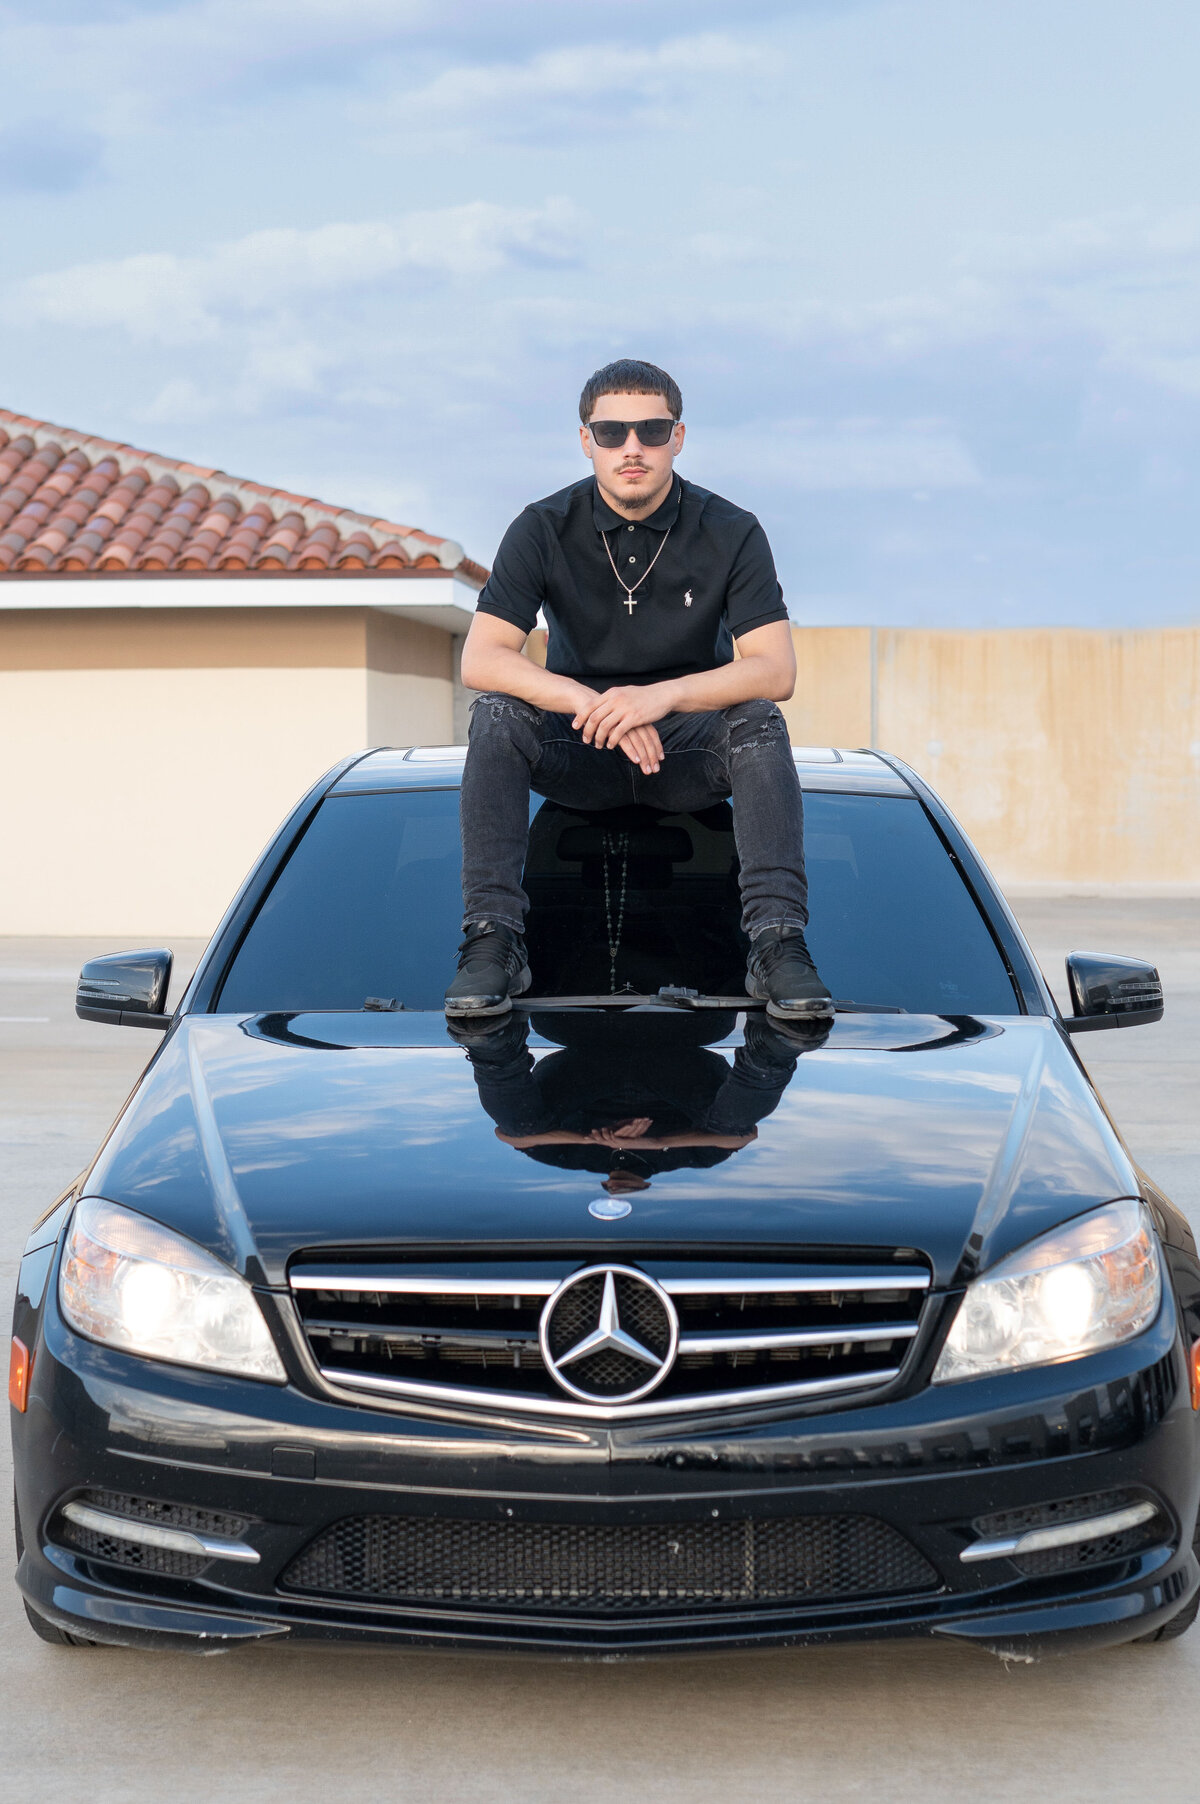 High school senior boy wearing sunglasses sits on top of black Mercedes car looking at the camera with a serious expression.